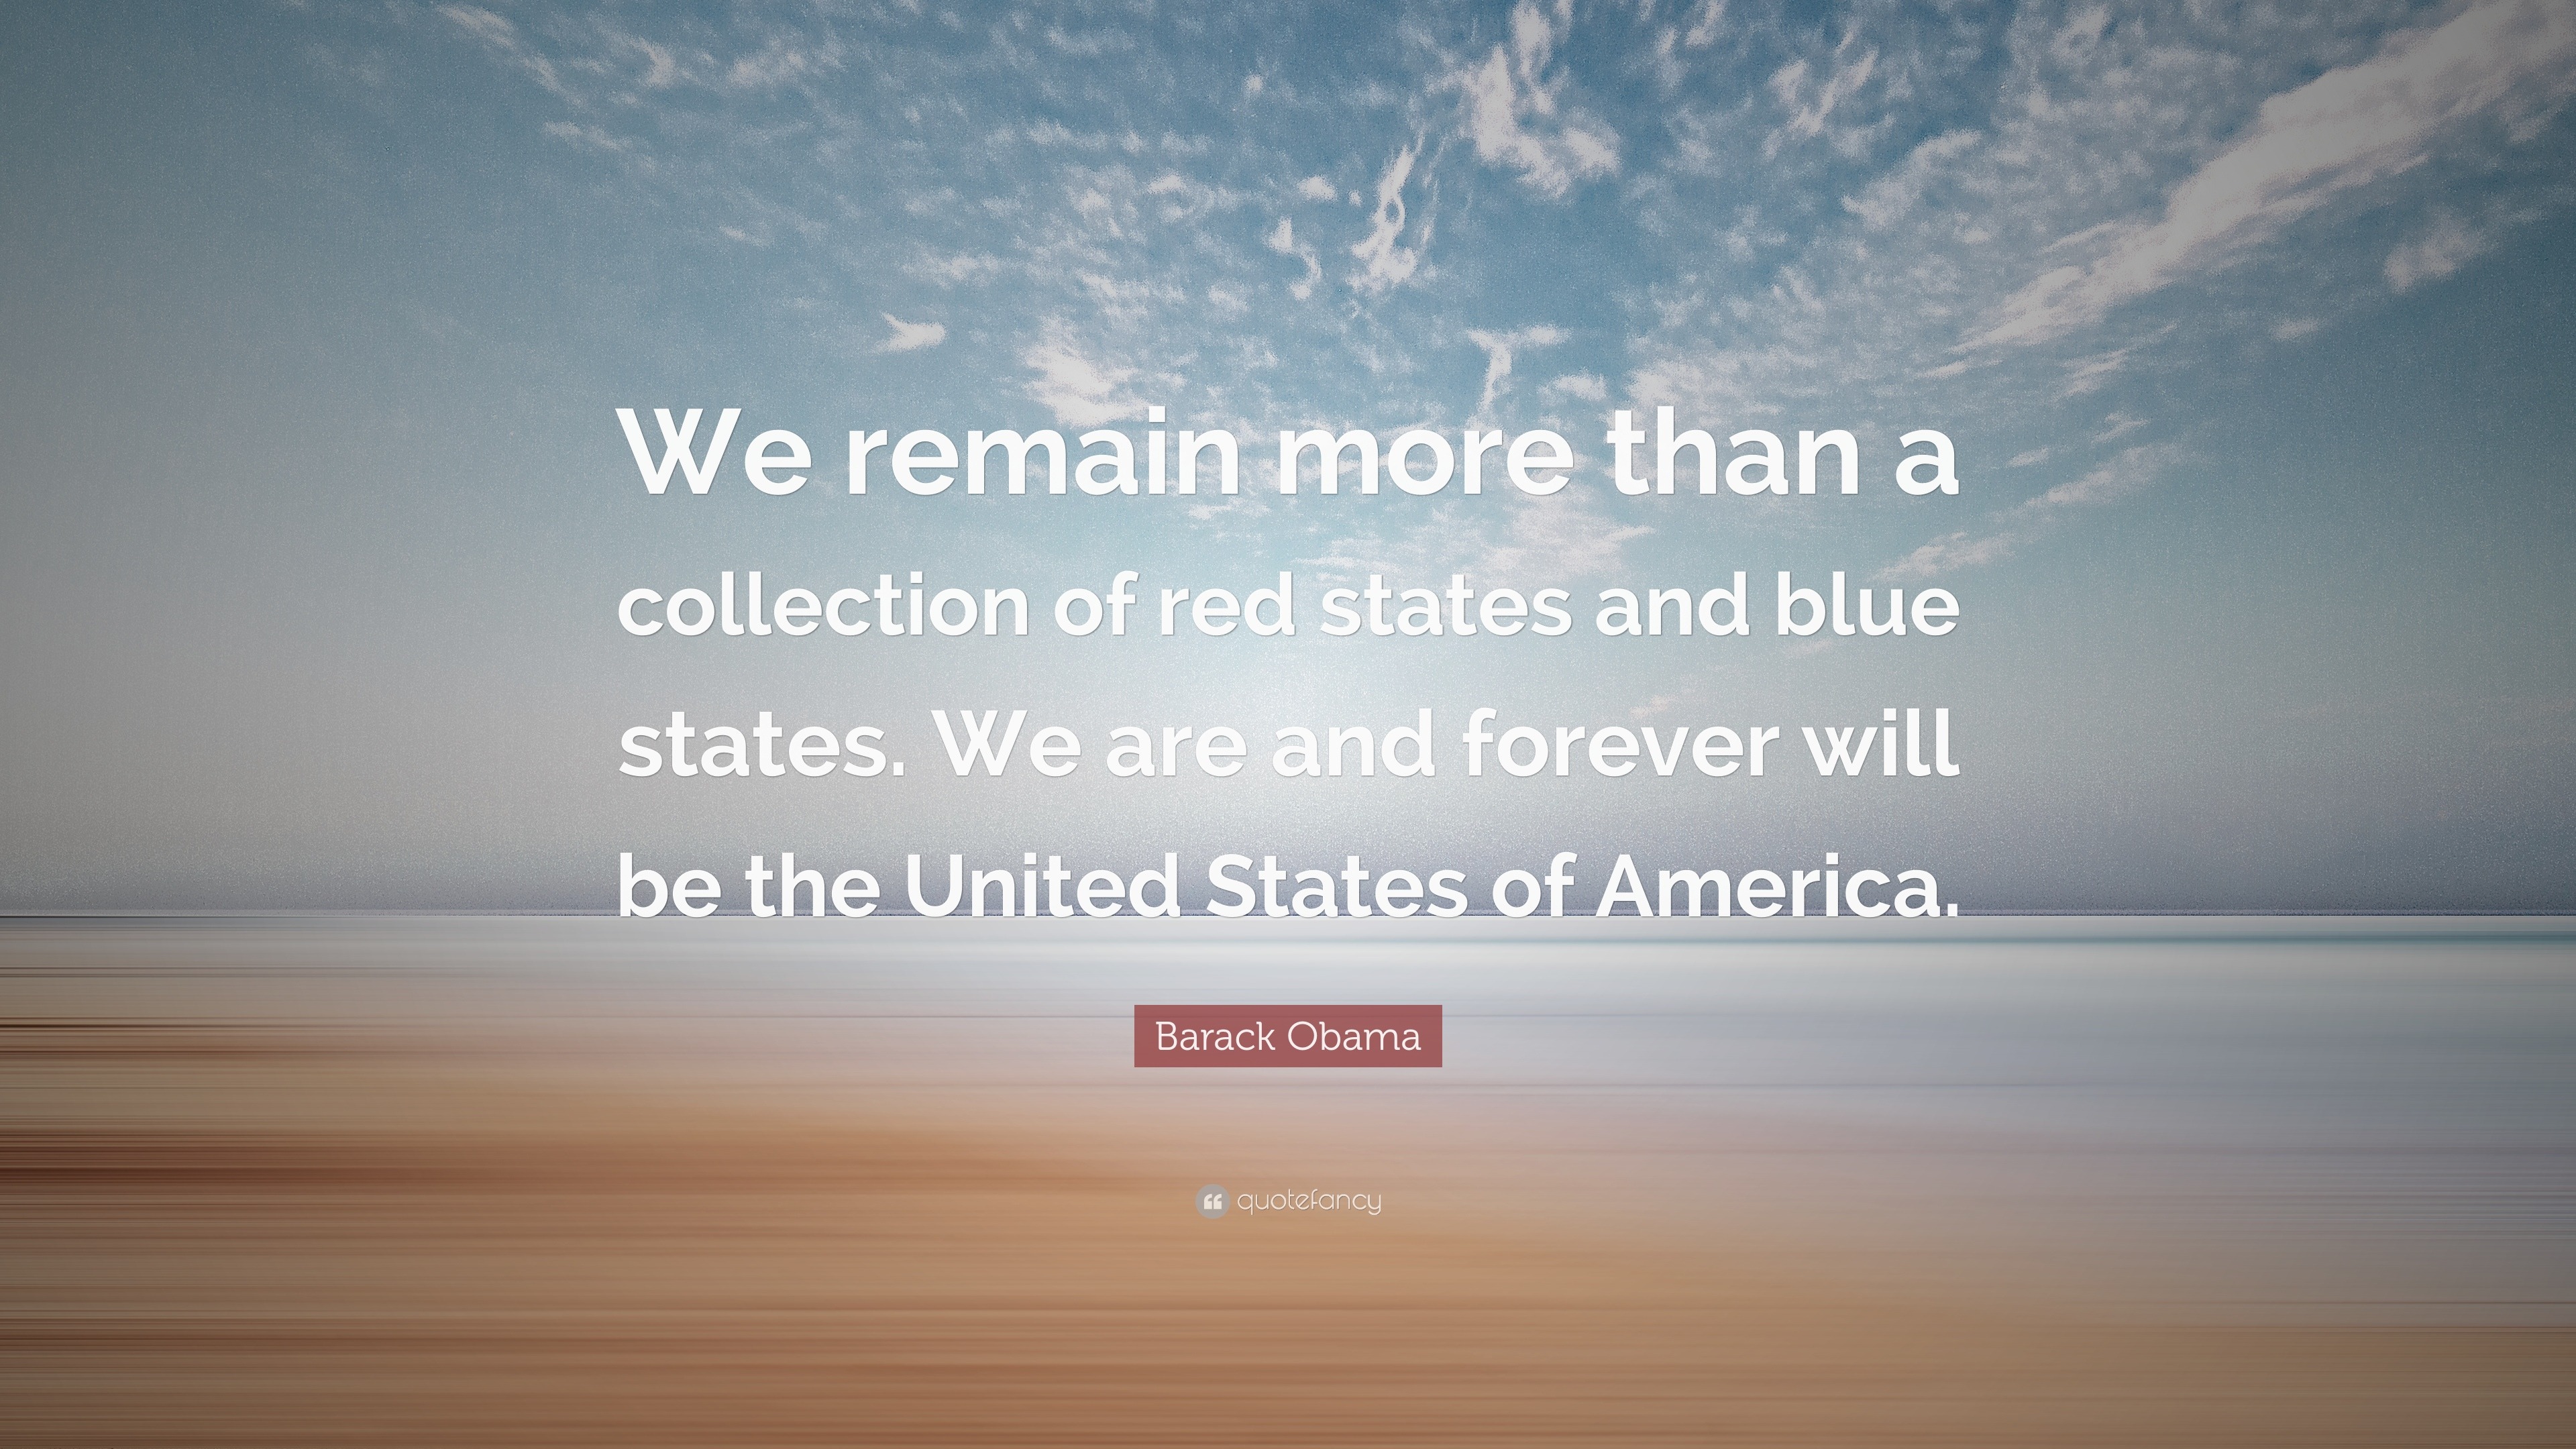 Barack Obama Quote: "We remain more than a collection of red states and blue states. We are and ...